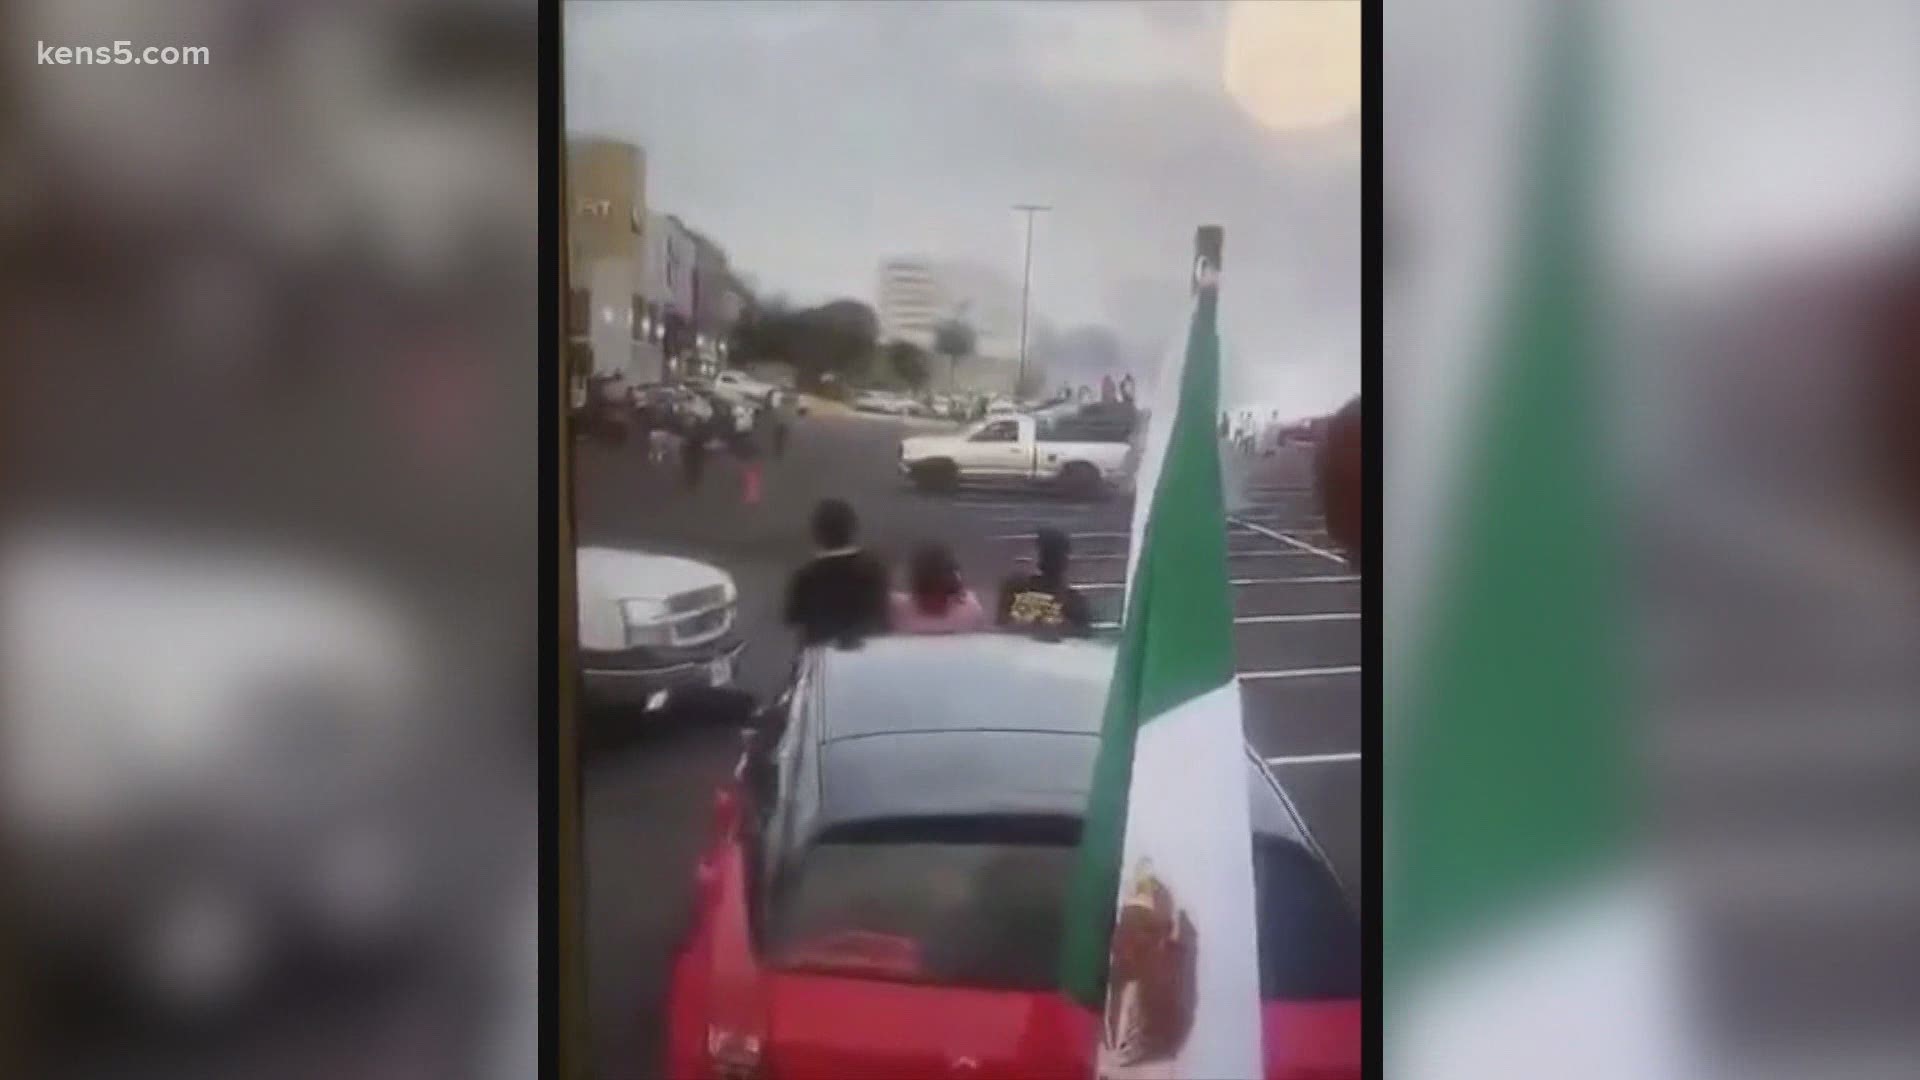 A teen was arrested, some drivers did donuts and burnouts, and a fire was set on the highway in what started as a driving celebration of Mexico's Independence Day.